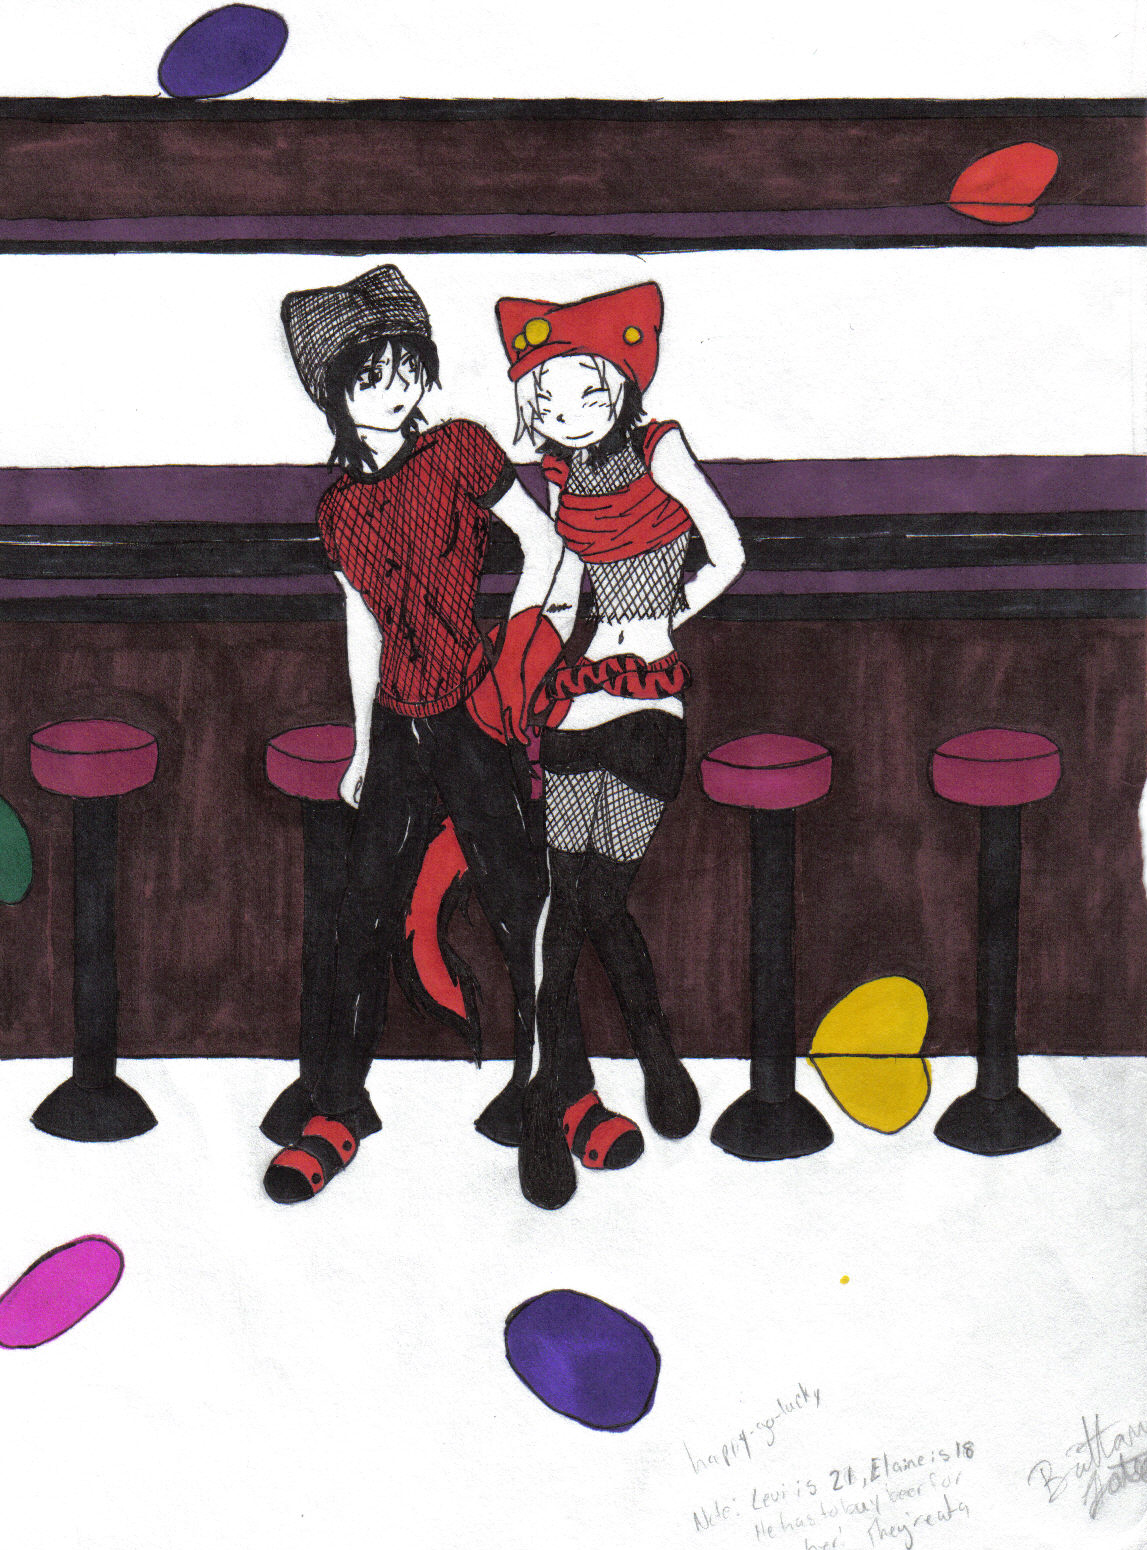 Elaine and Levi Teenagers in a Bar by Kaybe